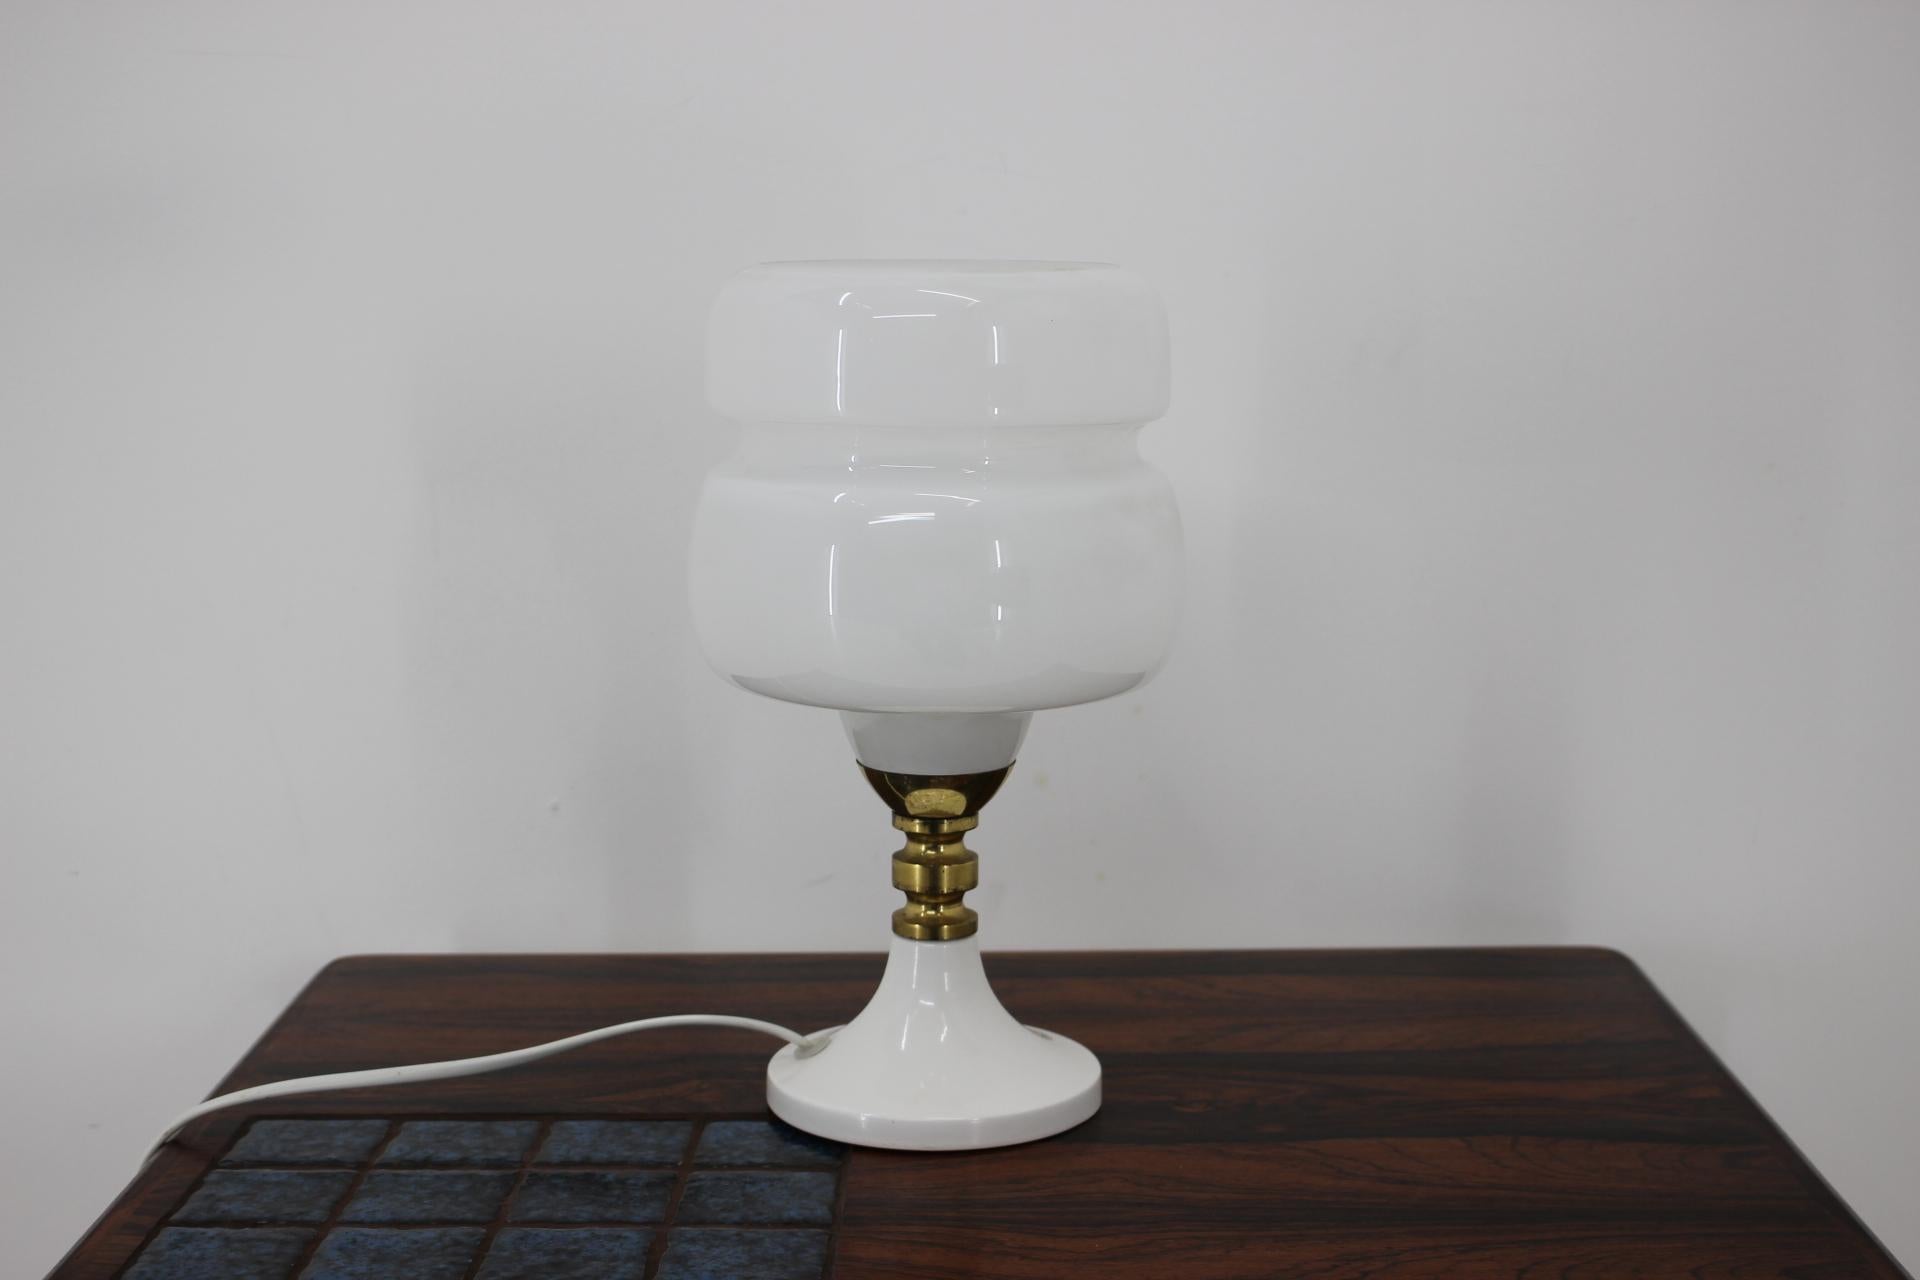 - Made in Czechoslovakia
- Made of metal, milk glass, brass
- Re-polished
- Fully functional
- Good, original condition.